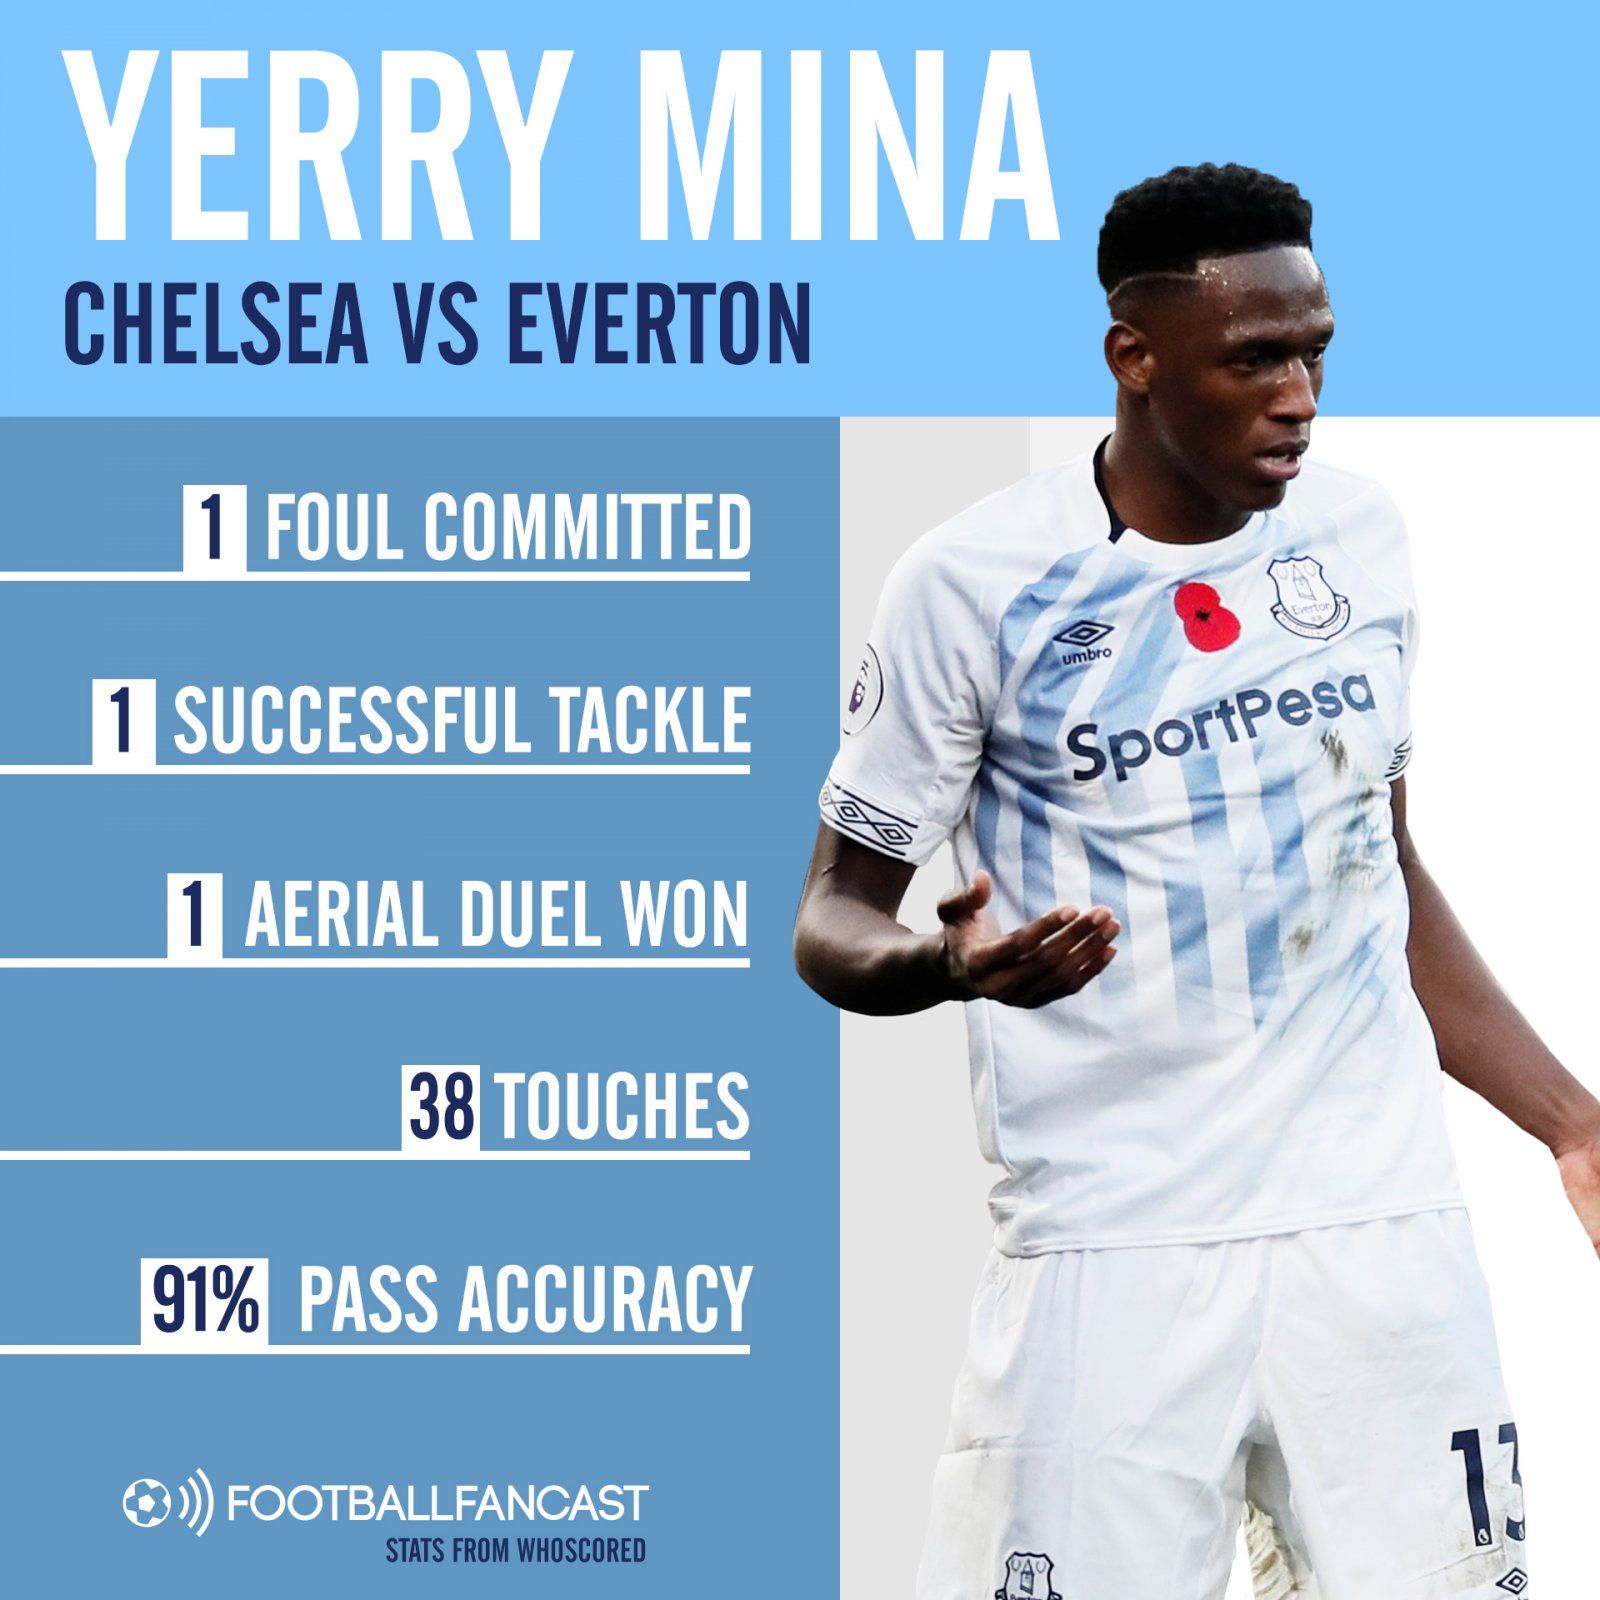 Yerry Mina's stats against Chelsea, according to WhoScored